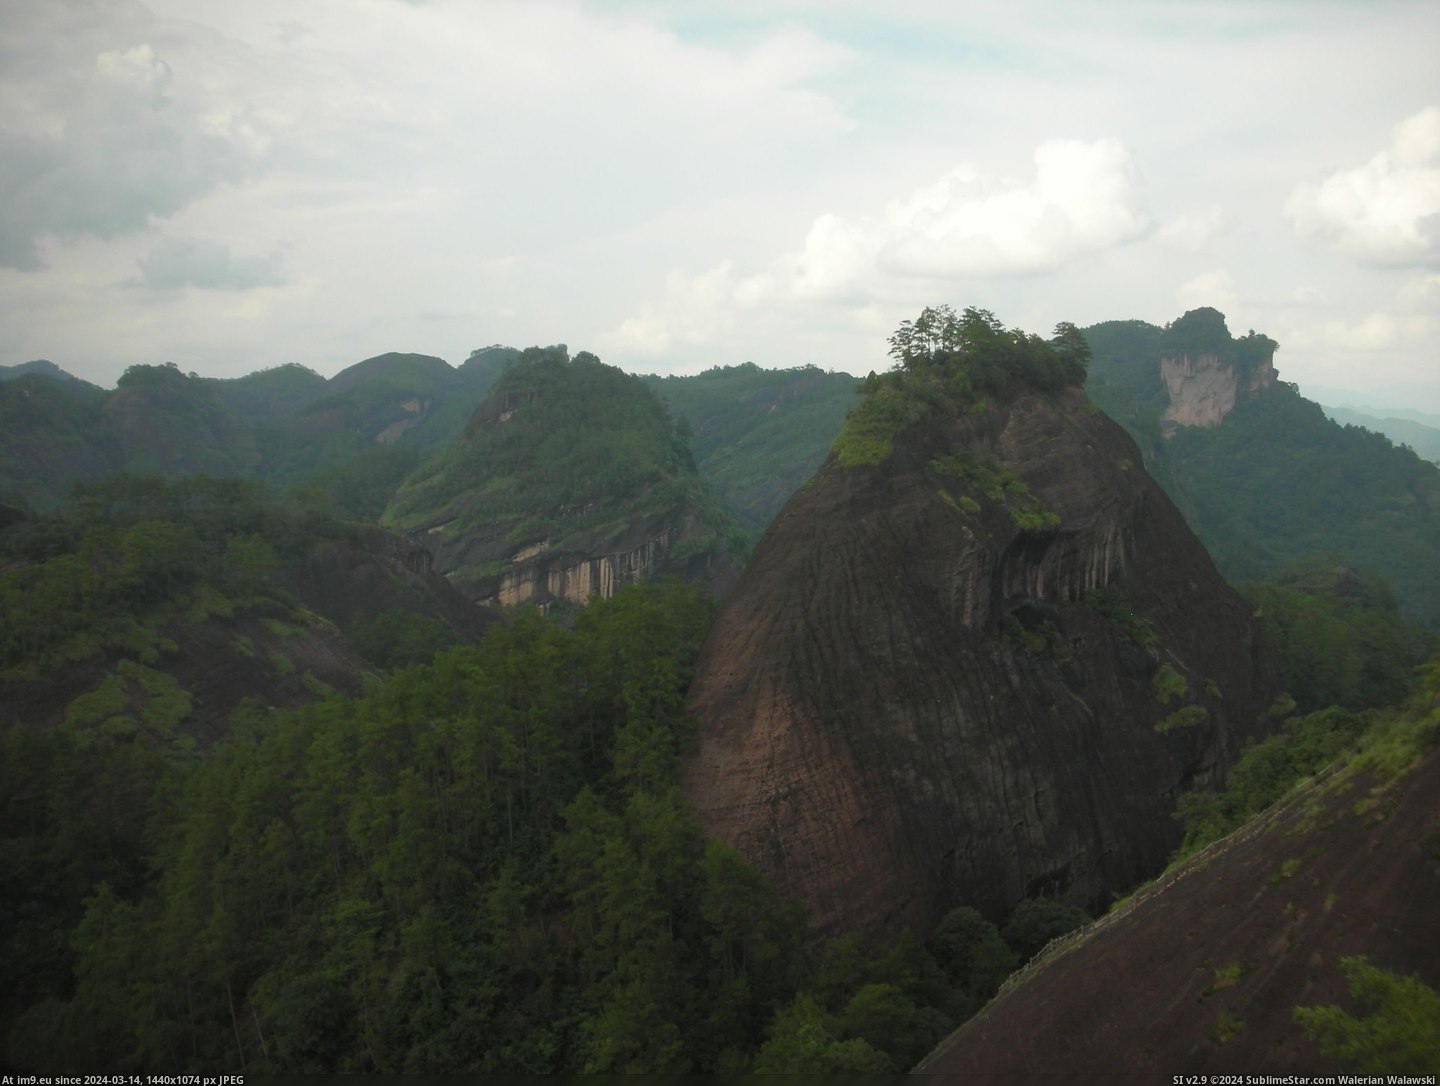 #Mountains #China #Fujian #Wuyi #Province #Northwest [Earthporn] Wuyi Mountains in northwest Fujian Province, China [2816 × 2112] Pic. (Image of album My r/EARTHPORN favs))